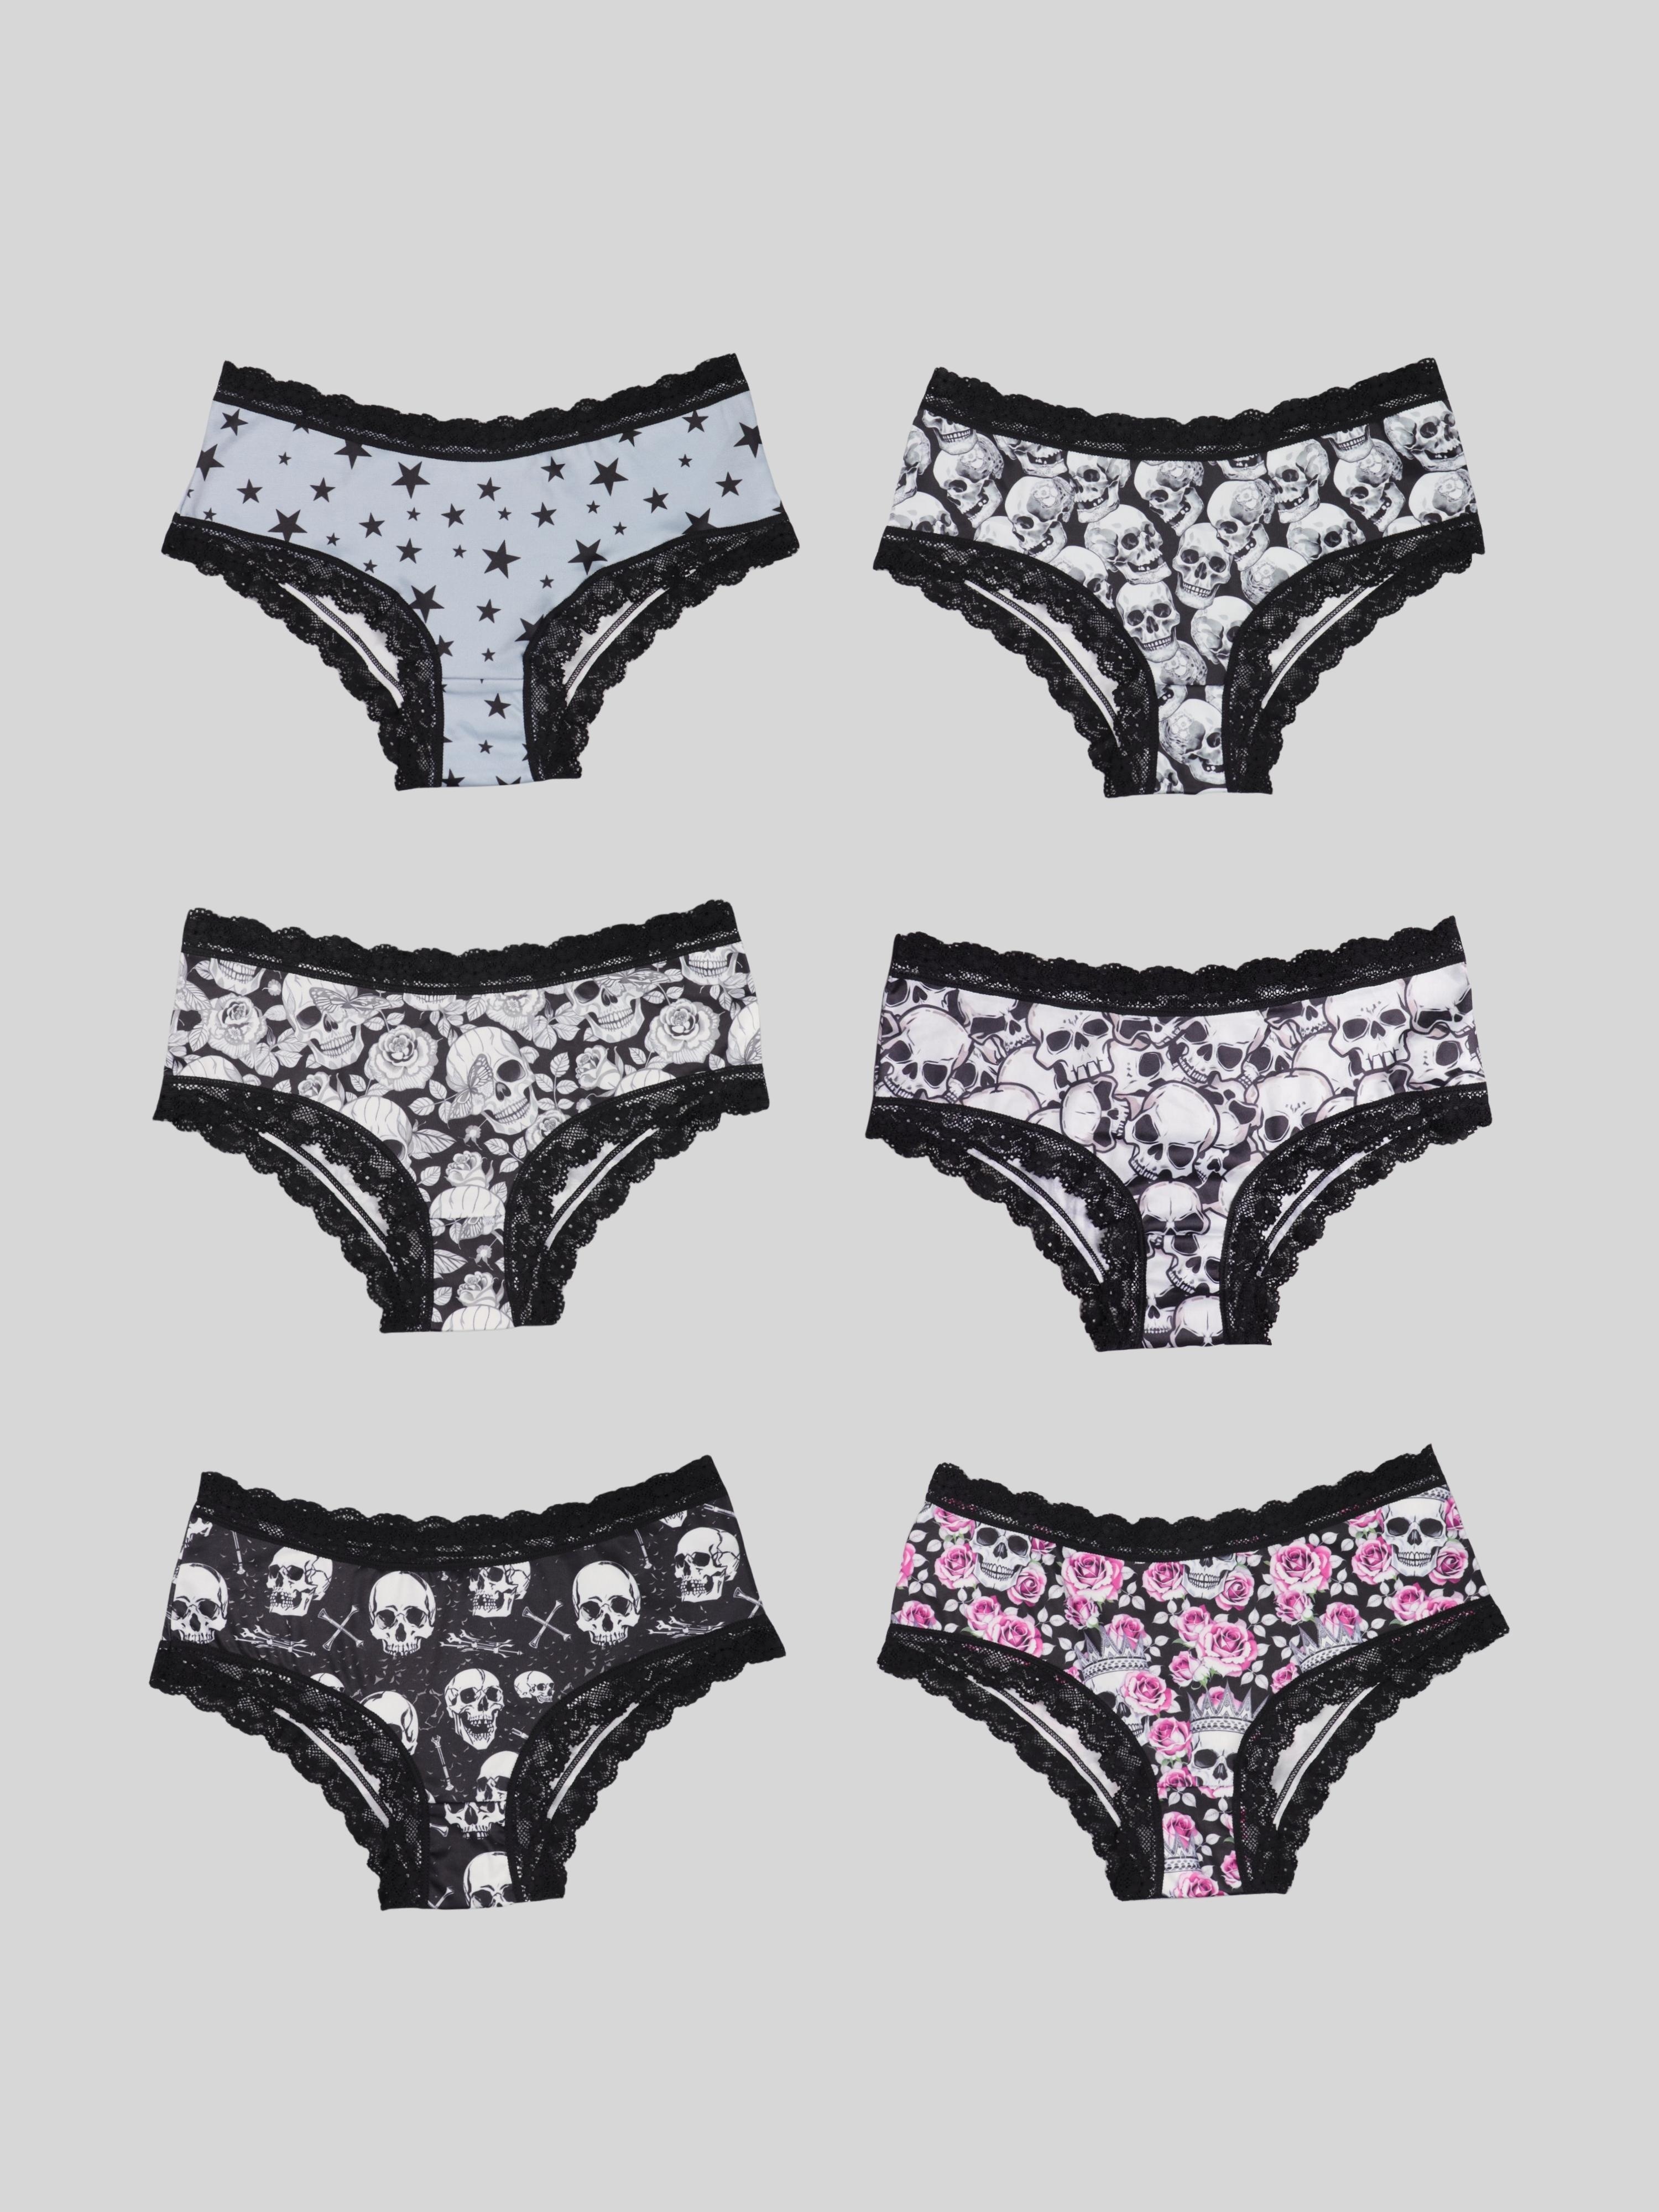 Buy Victoria's Secret Floral Lace Hipster Thong Knickers from the